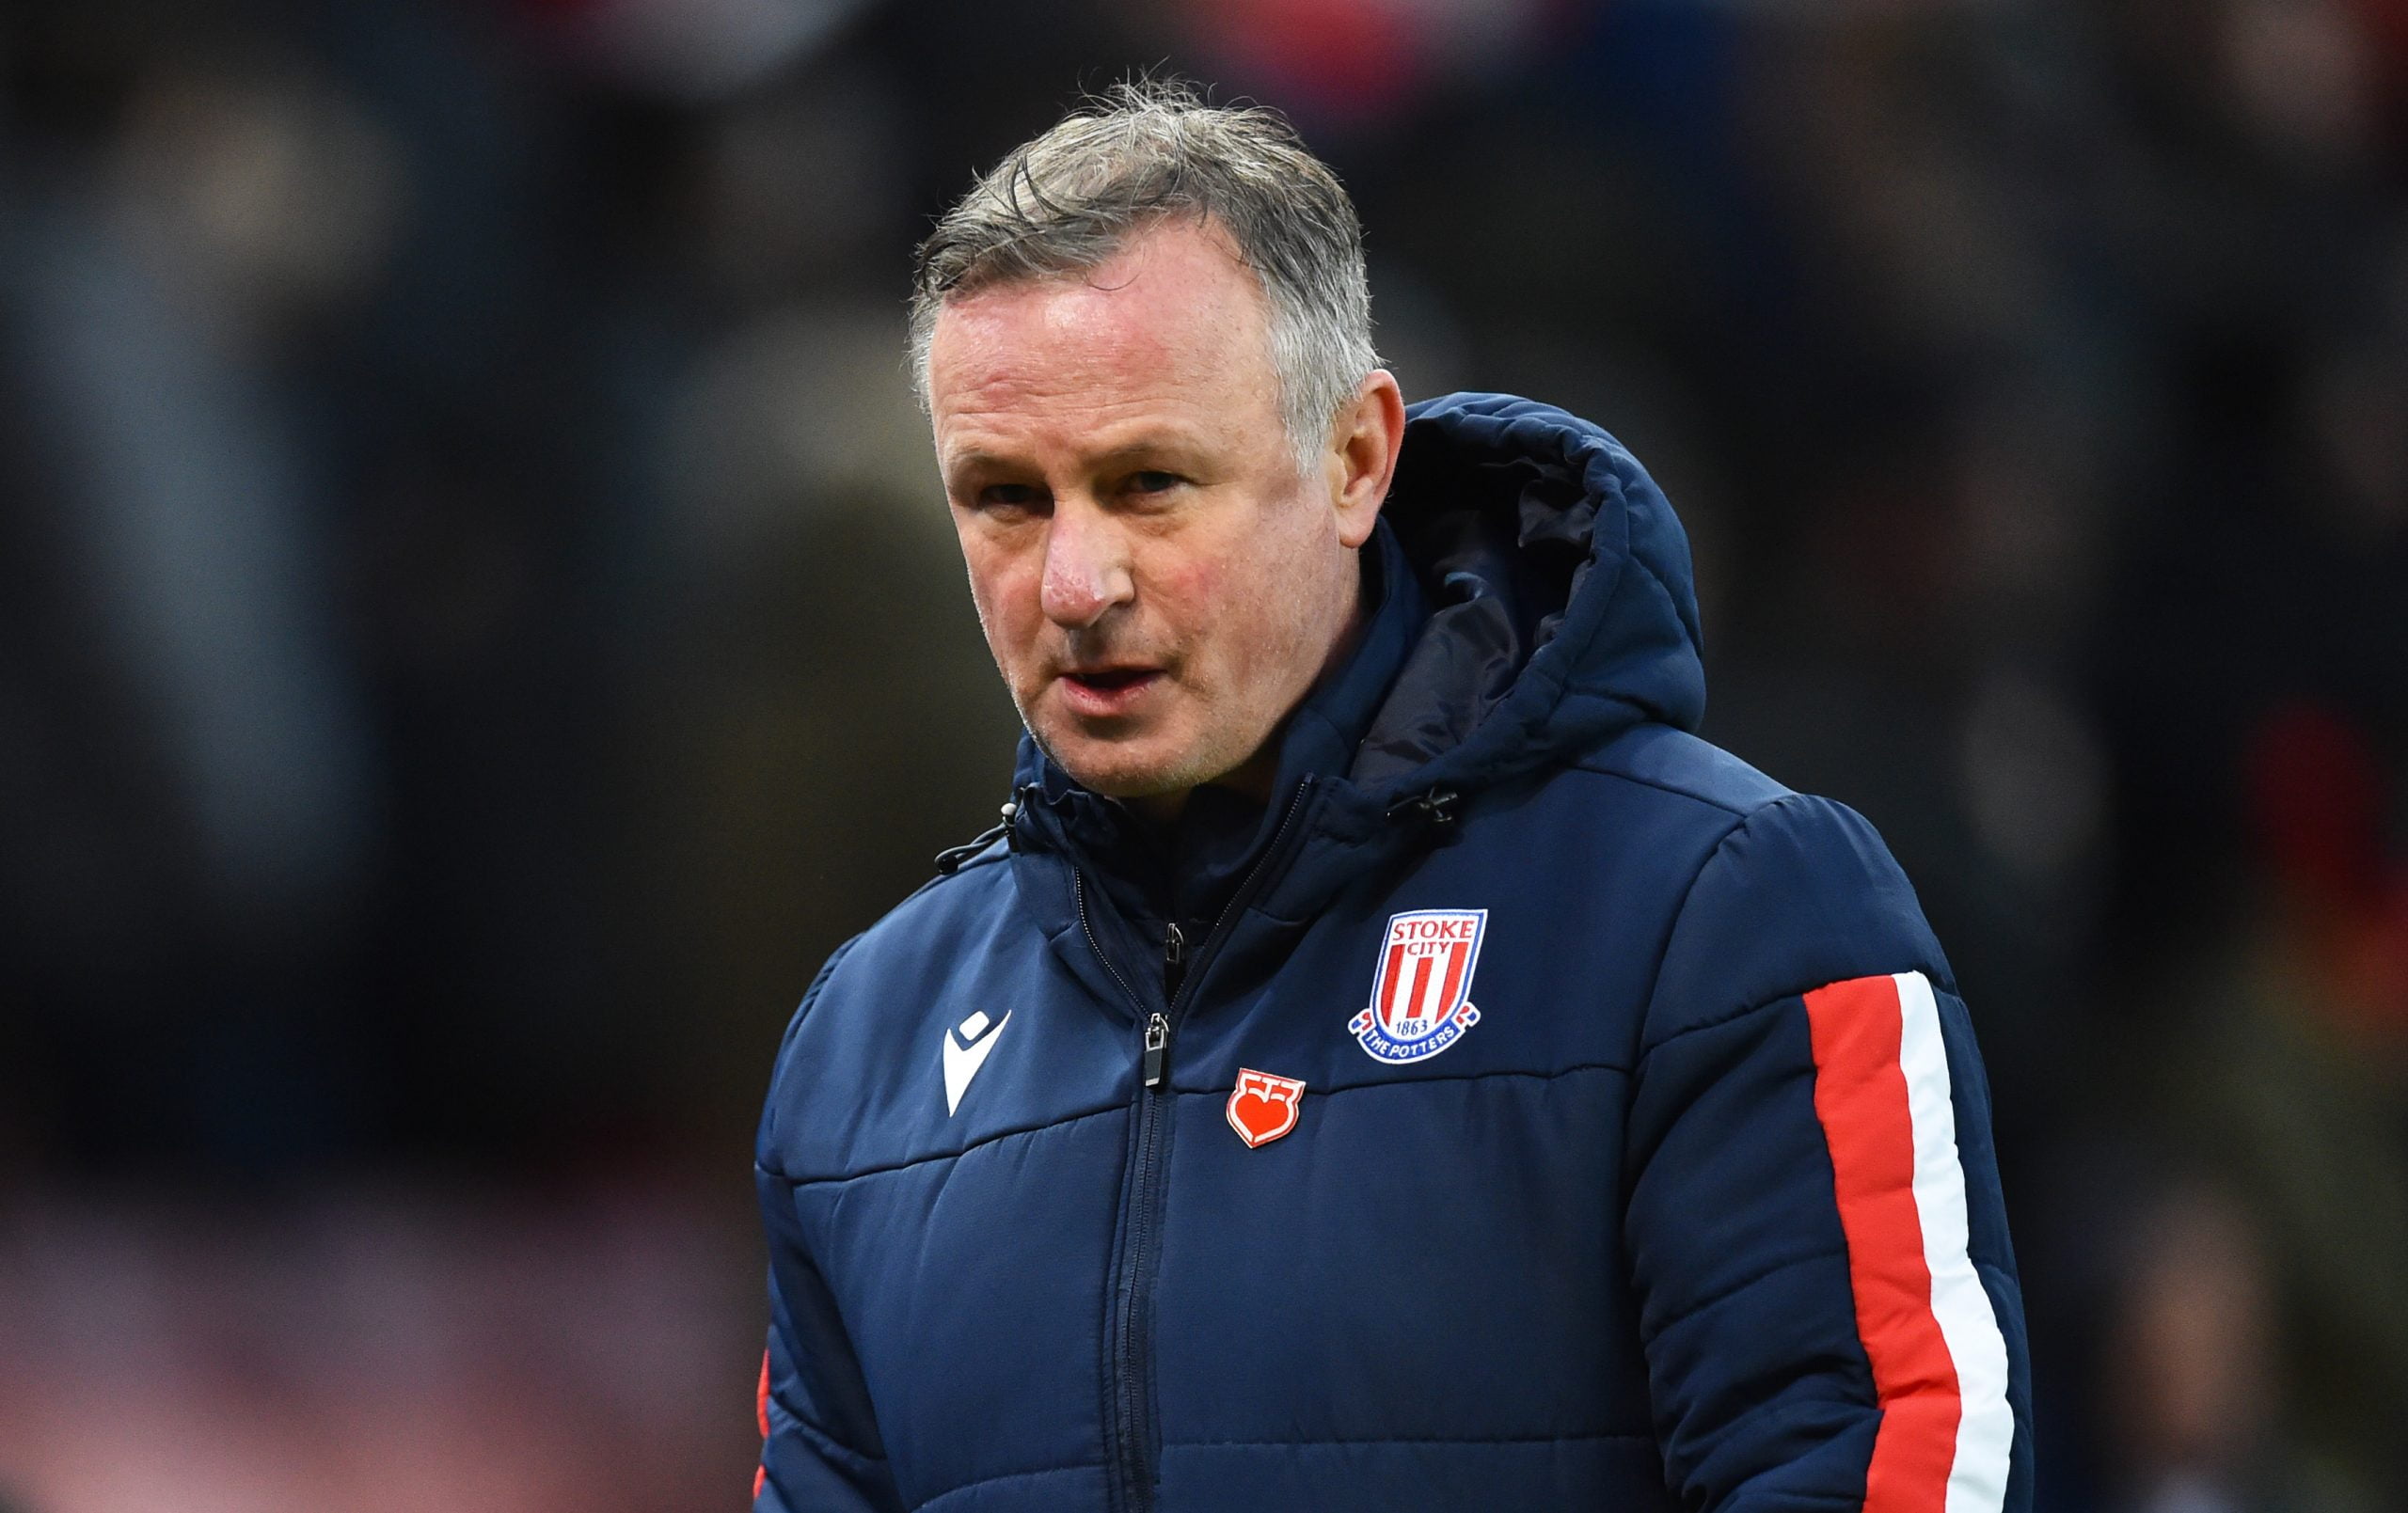 STOKE ON TRENT, ENGLAND - DECEMBER 14: Michael O'Neill manager of Stoke City walks to the changing rooms at half time during the Sky Bet Championship match between Stoke City and Reading at Bet365 Stadium on December 14, 2019 in Stoke on Trent, England. (Photo by Nathan Stirk/Getty Images)